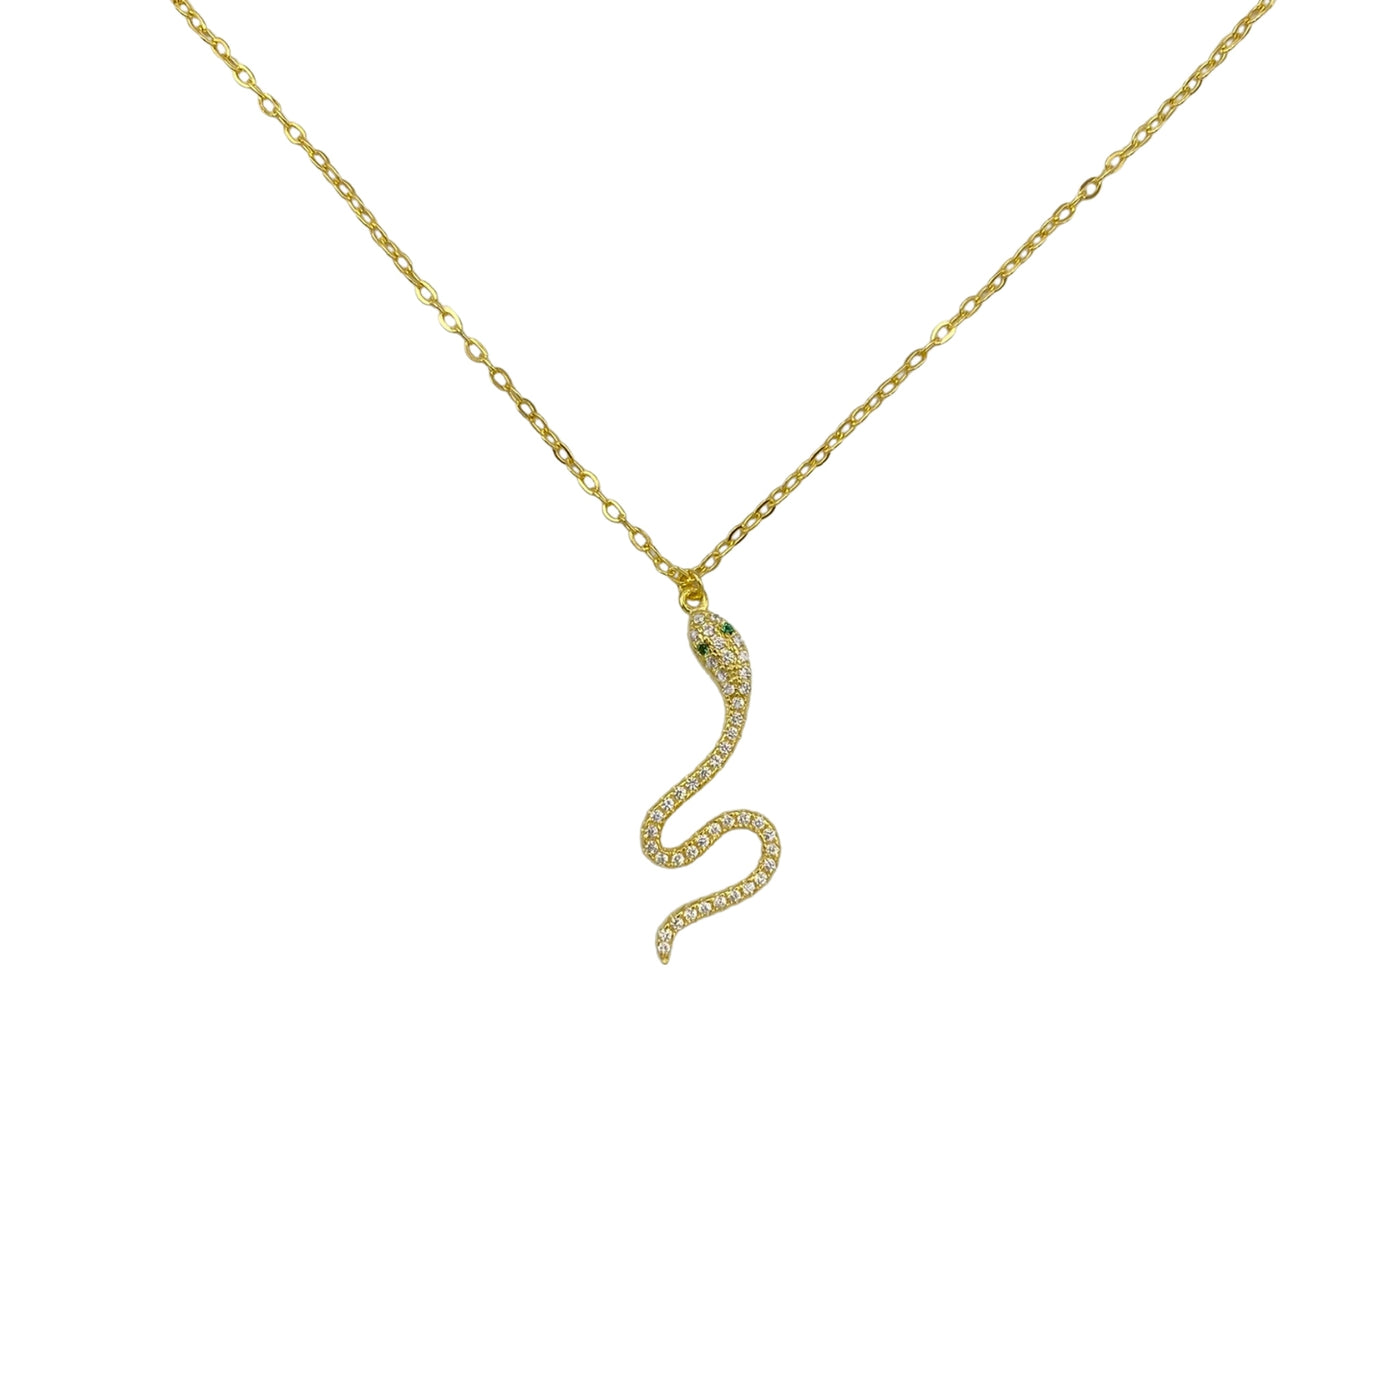 Silver necklace with snake charm